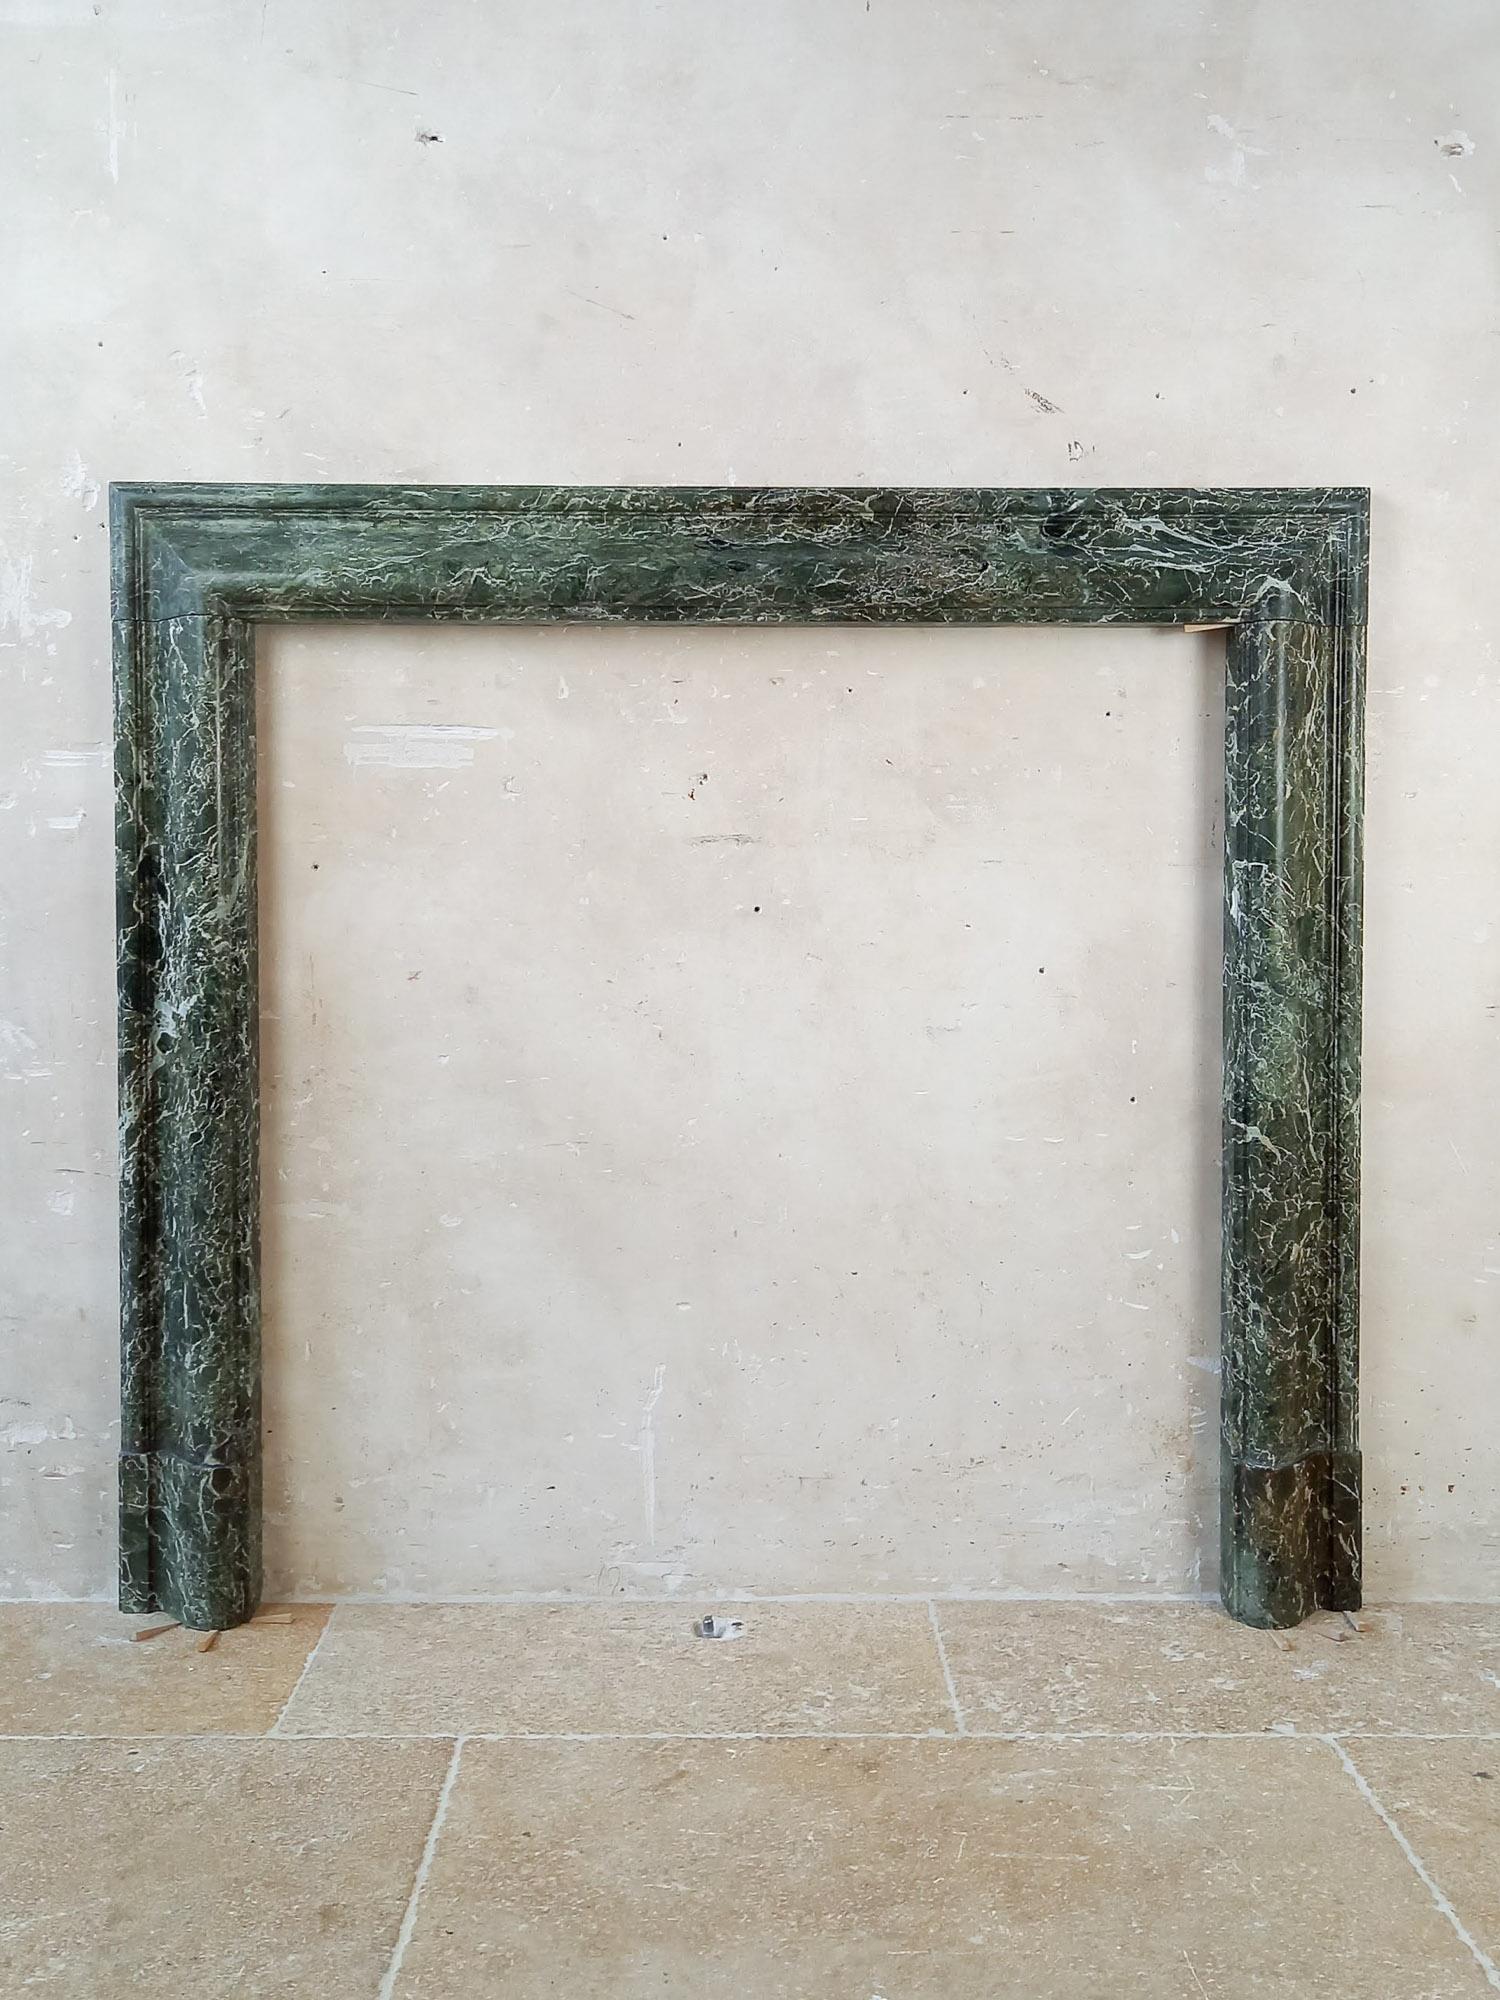 Simple and elegant antique Italian green marble fireplace, 19th Century Italy. Mantlepiece made of green marble (Vert Patricia) en sleek elegant lines. Beautiful antique piece that works great in a modern interior.

dimensions: H 106 x W 118 x D 7